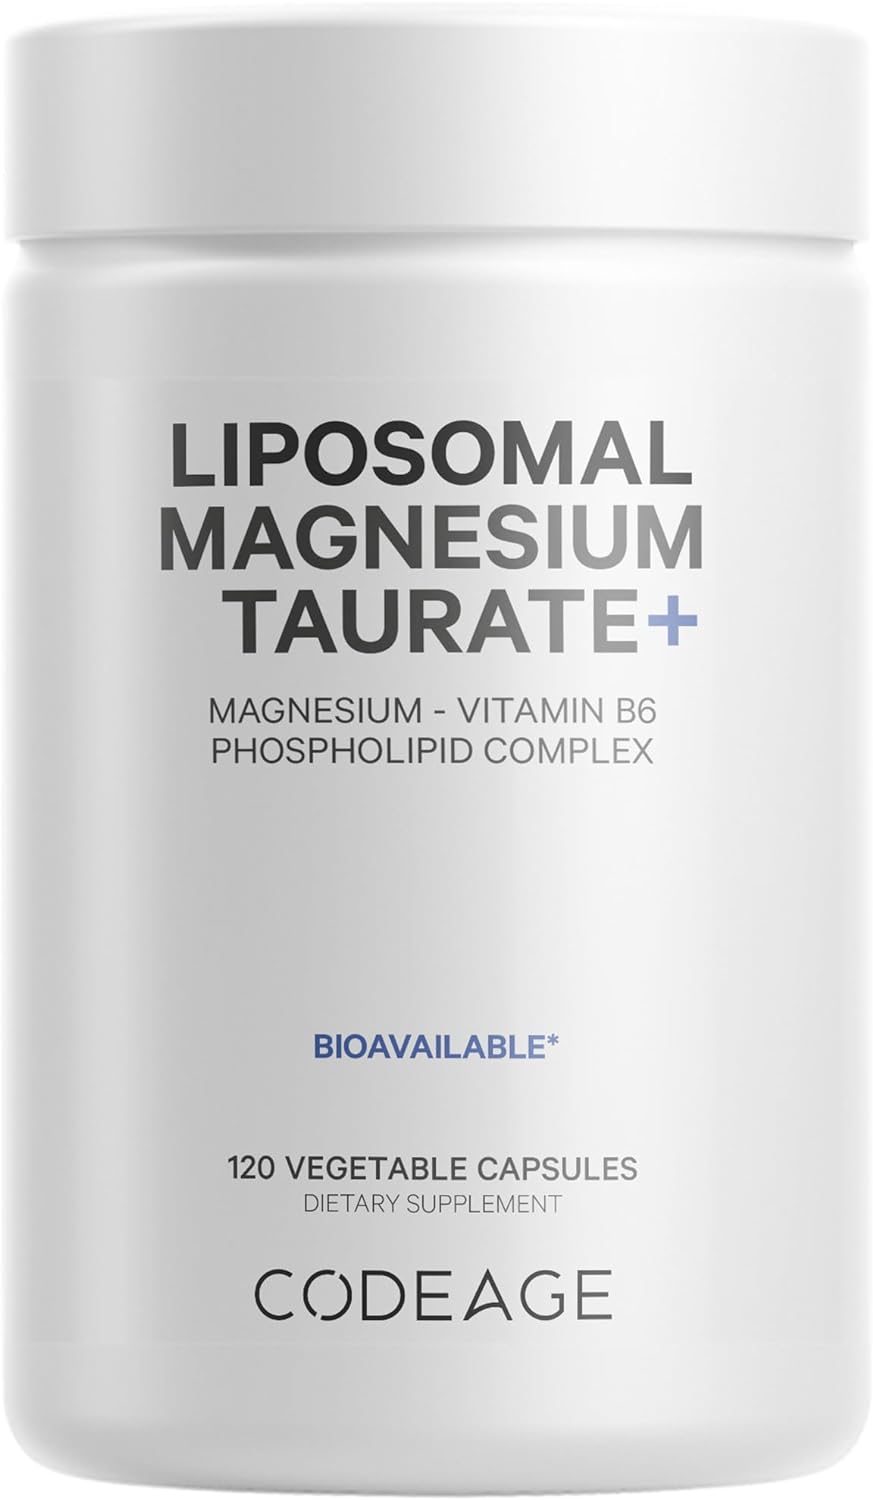 Codeage Liposomal Magnesium Taurate+ Supplement - 2-Month Supply - Mag